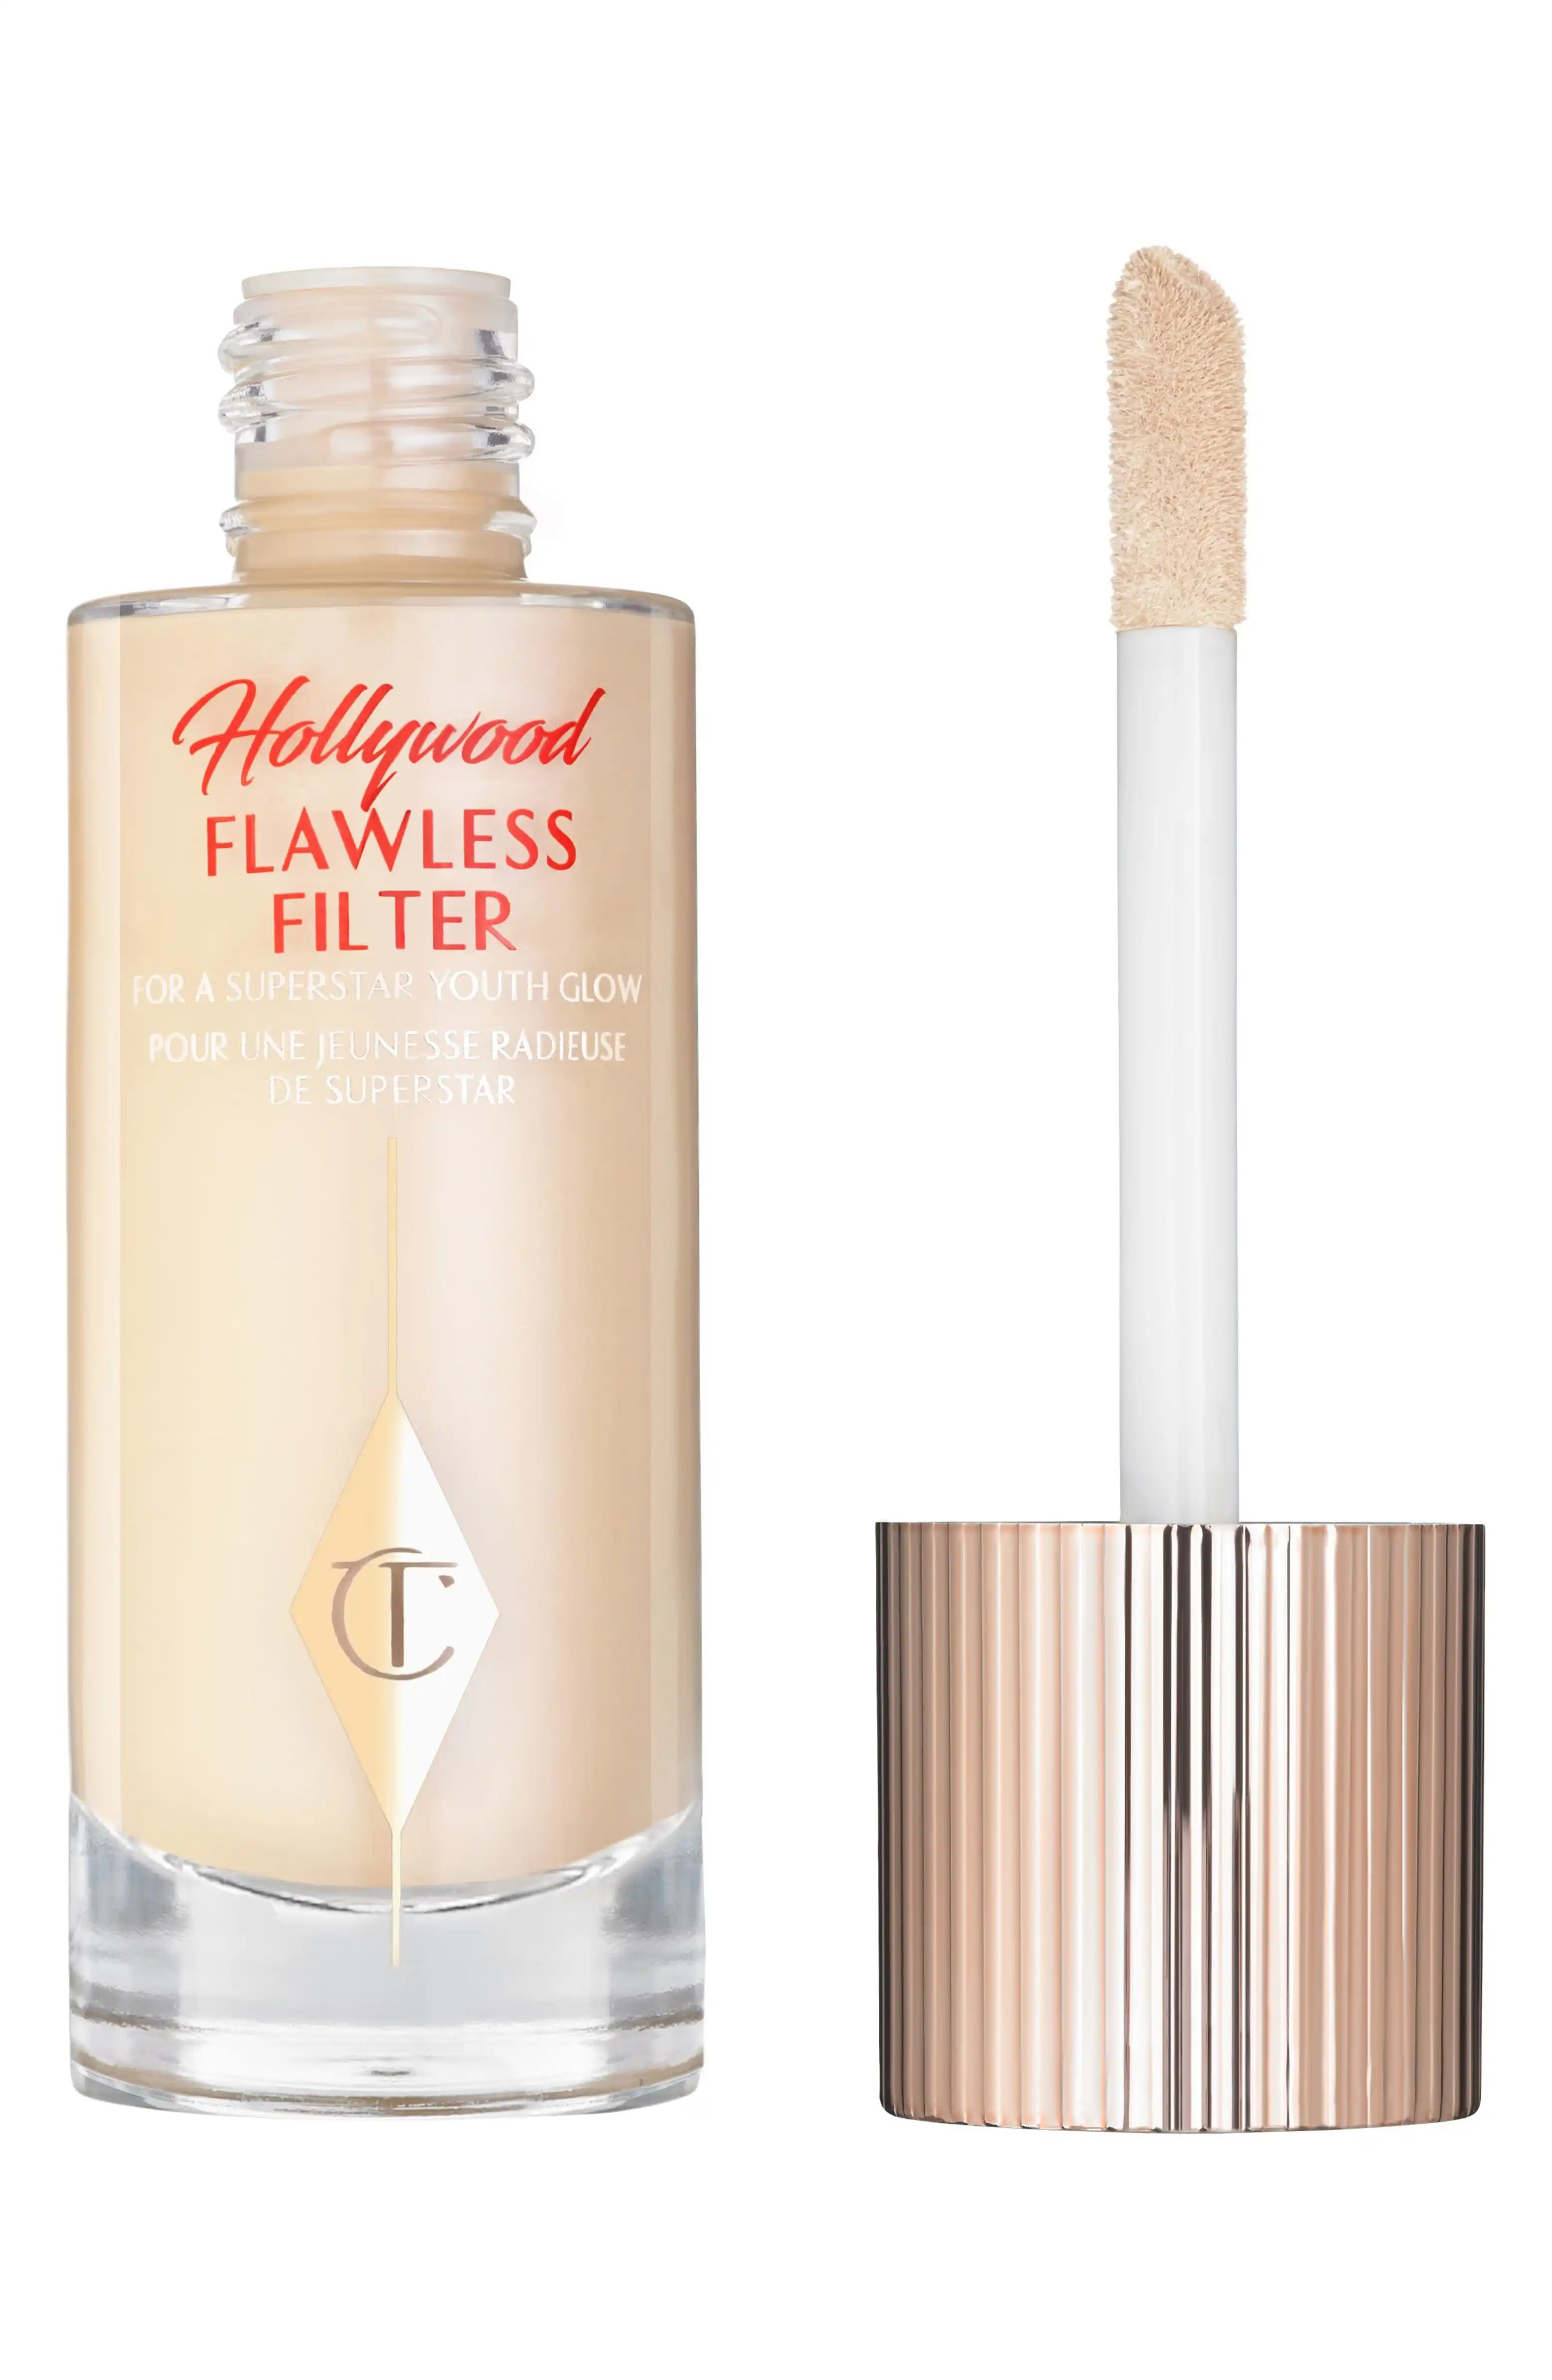 Hollywood Flawless Filter | Nordstrom